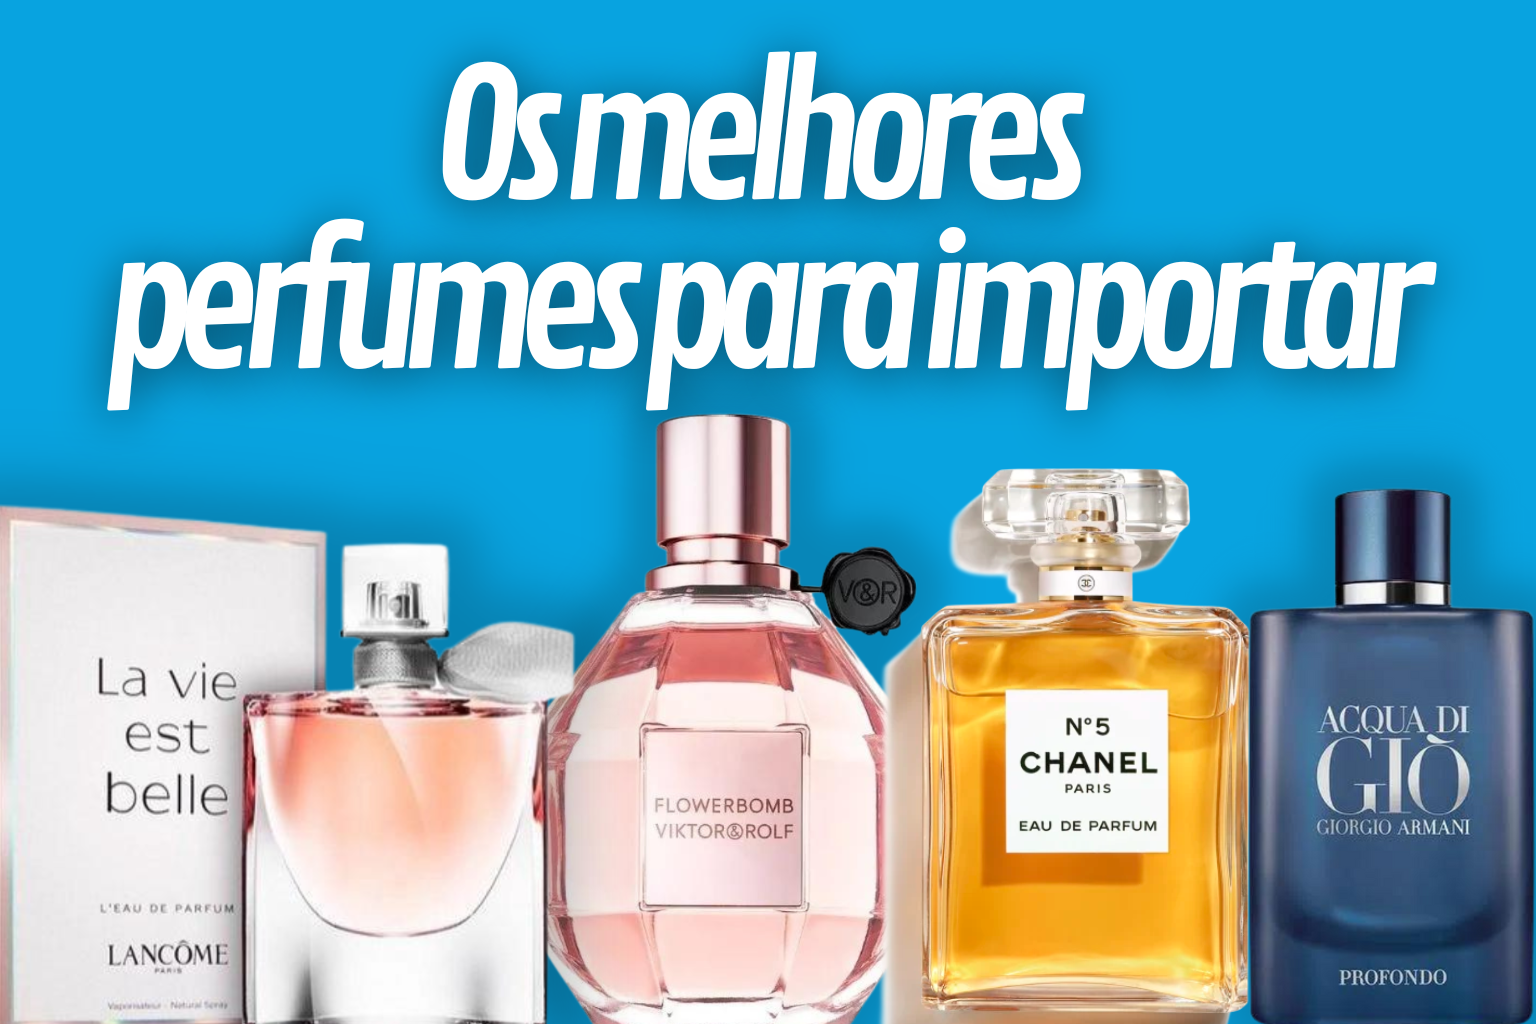 See which are the 10 best selling imported perfumes of the moment